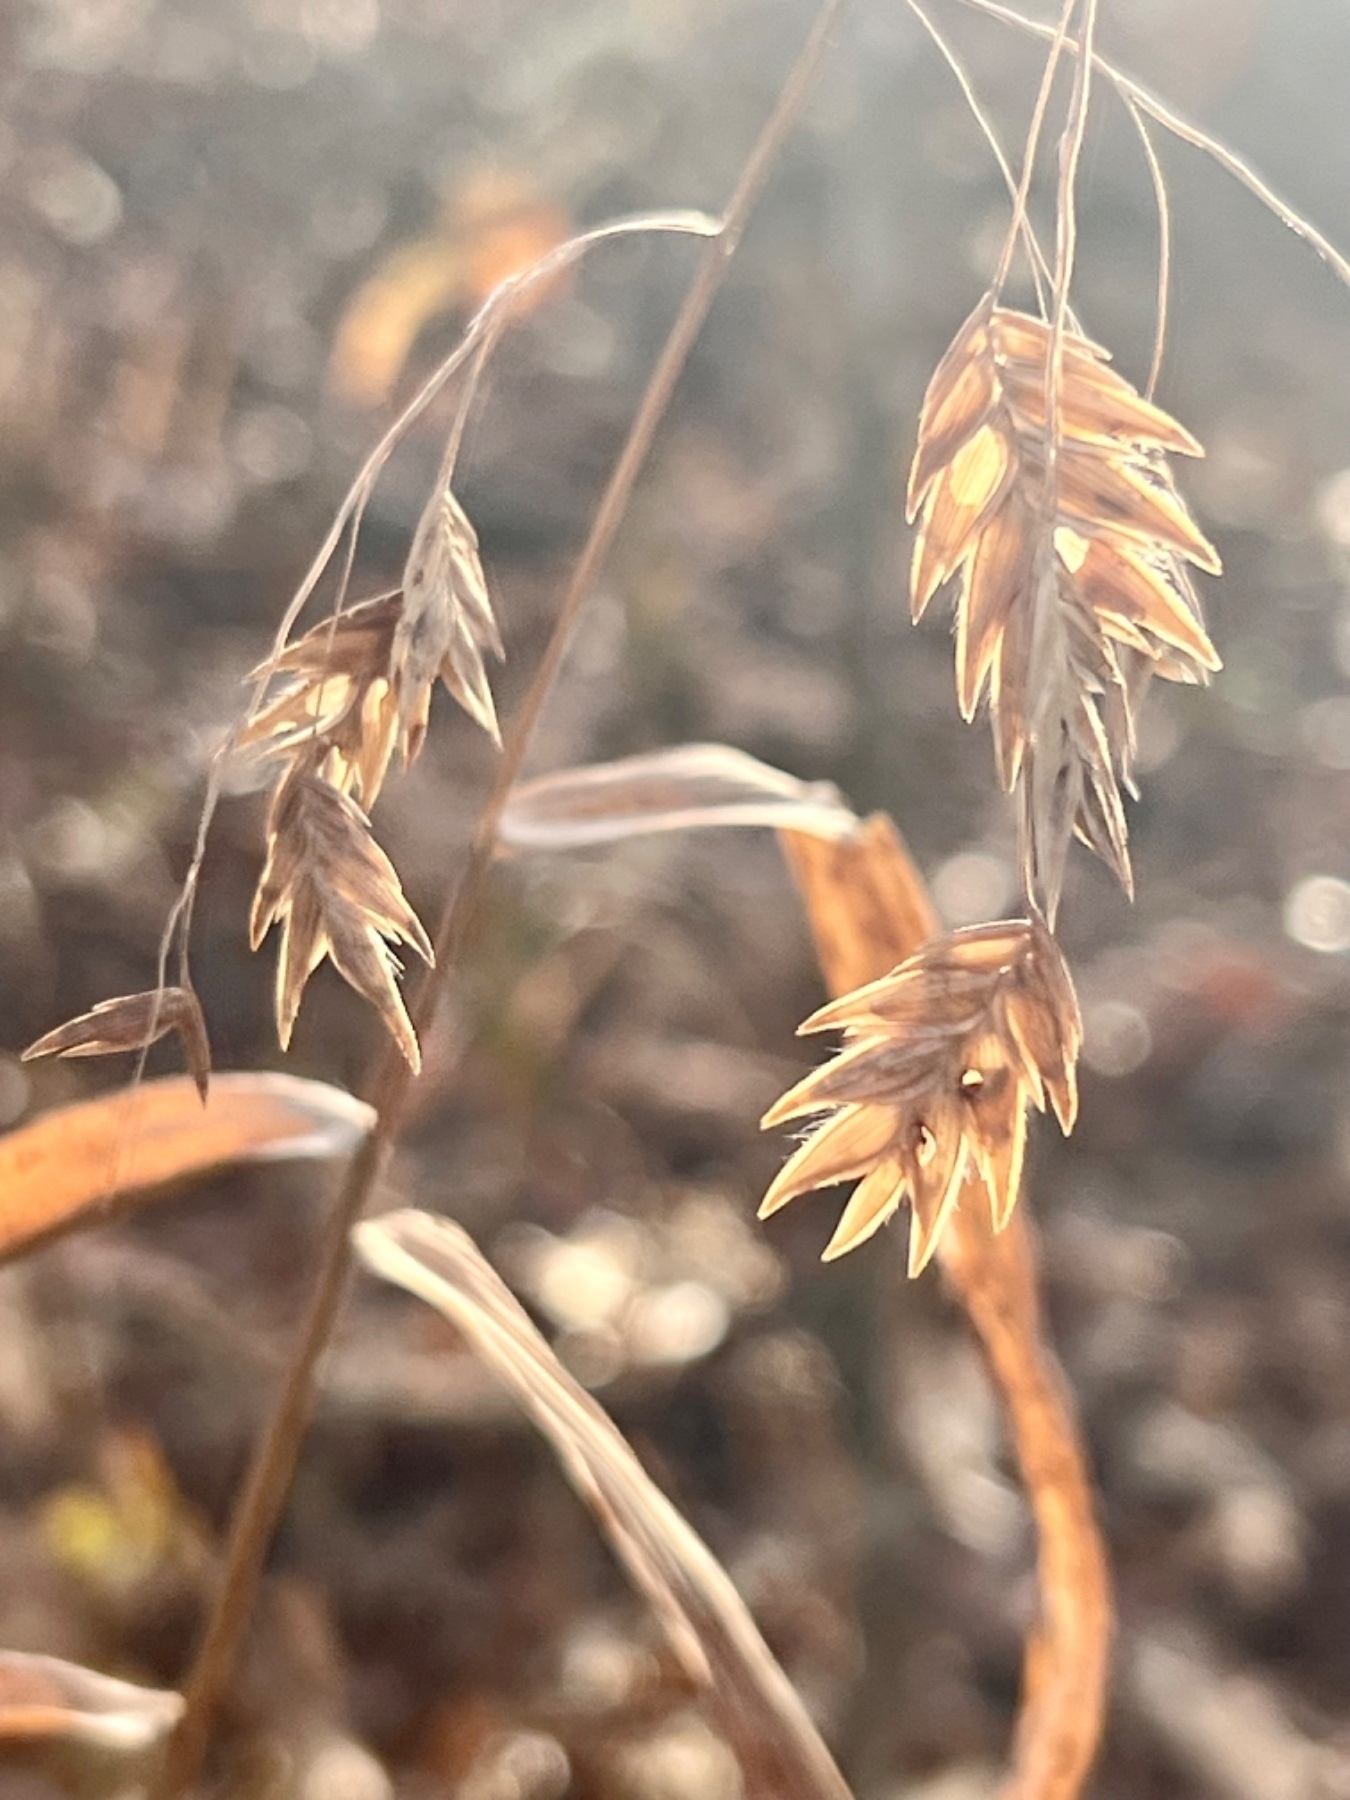 The golden seed heads of the sea or river oats plant. Each cluster  of seeds consists of around eight seeds which are flat and pointy on their outer end. the heads hang from deicate golden brown stems that are attached to larger stems that are, in turn, attachd to the main stem of the plant. Blurred against the background, a few remaining golden leaves can be seen along the main plant stem. 